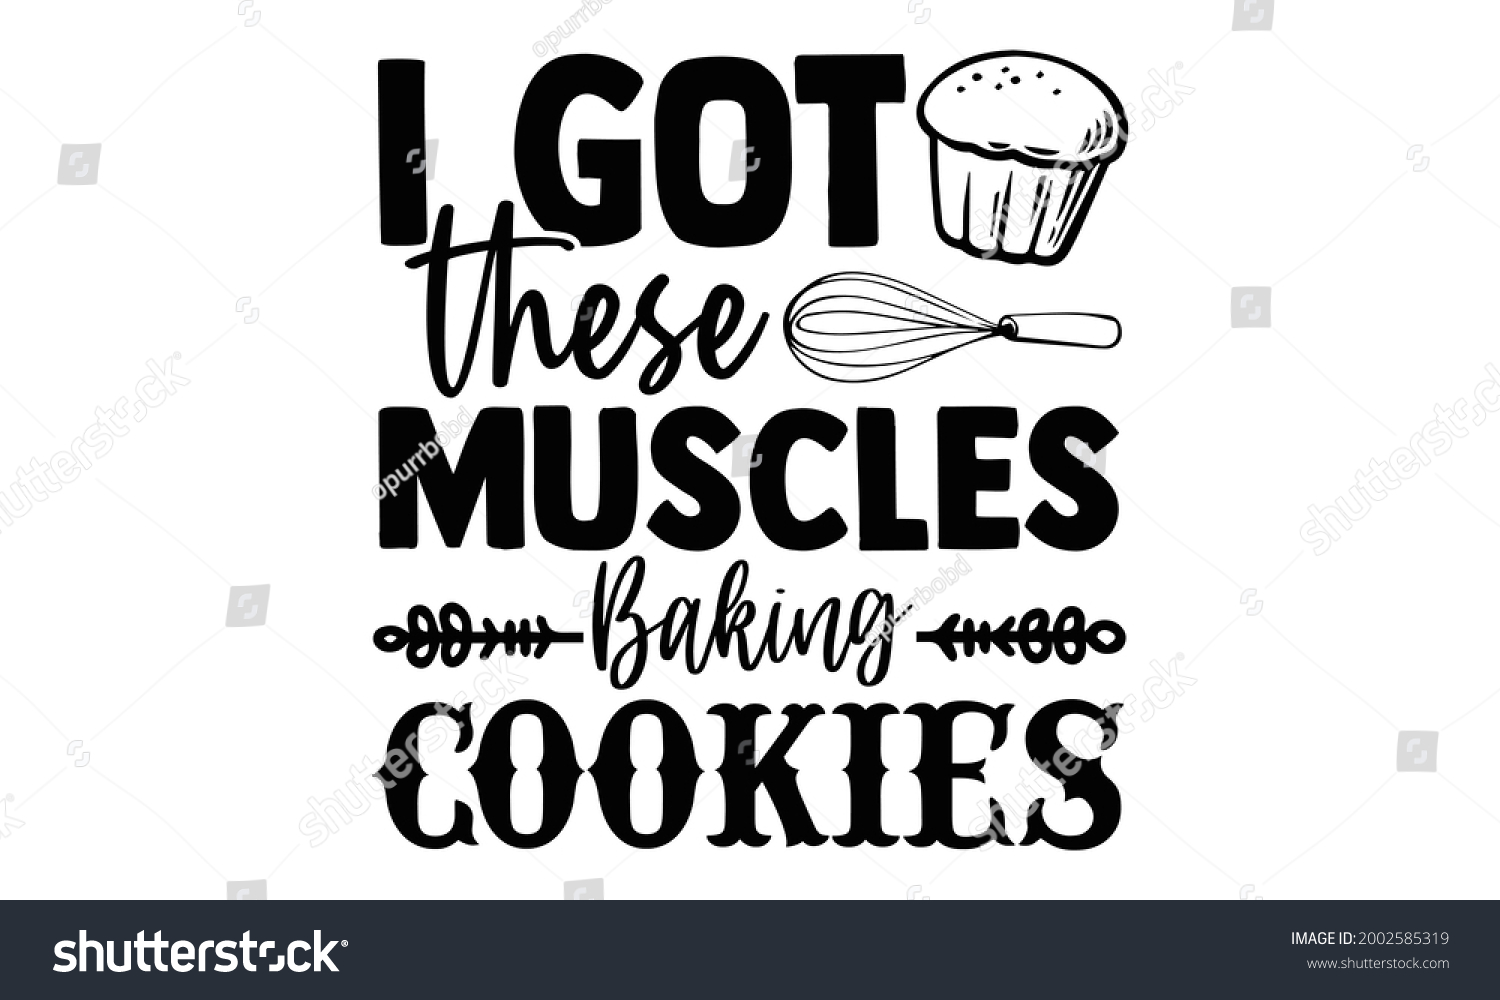 SVG of I got these muscles baking cookies- Baking t shirts design, Hand drawn lettering phrase, Calligraphy t shirt design, Isolated on white background, svg Files for Cutting Cricut and Silhouette, EPS 10  svg